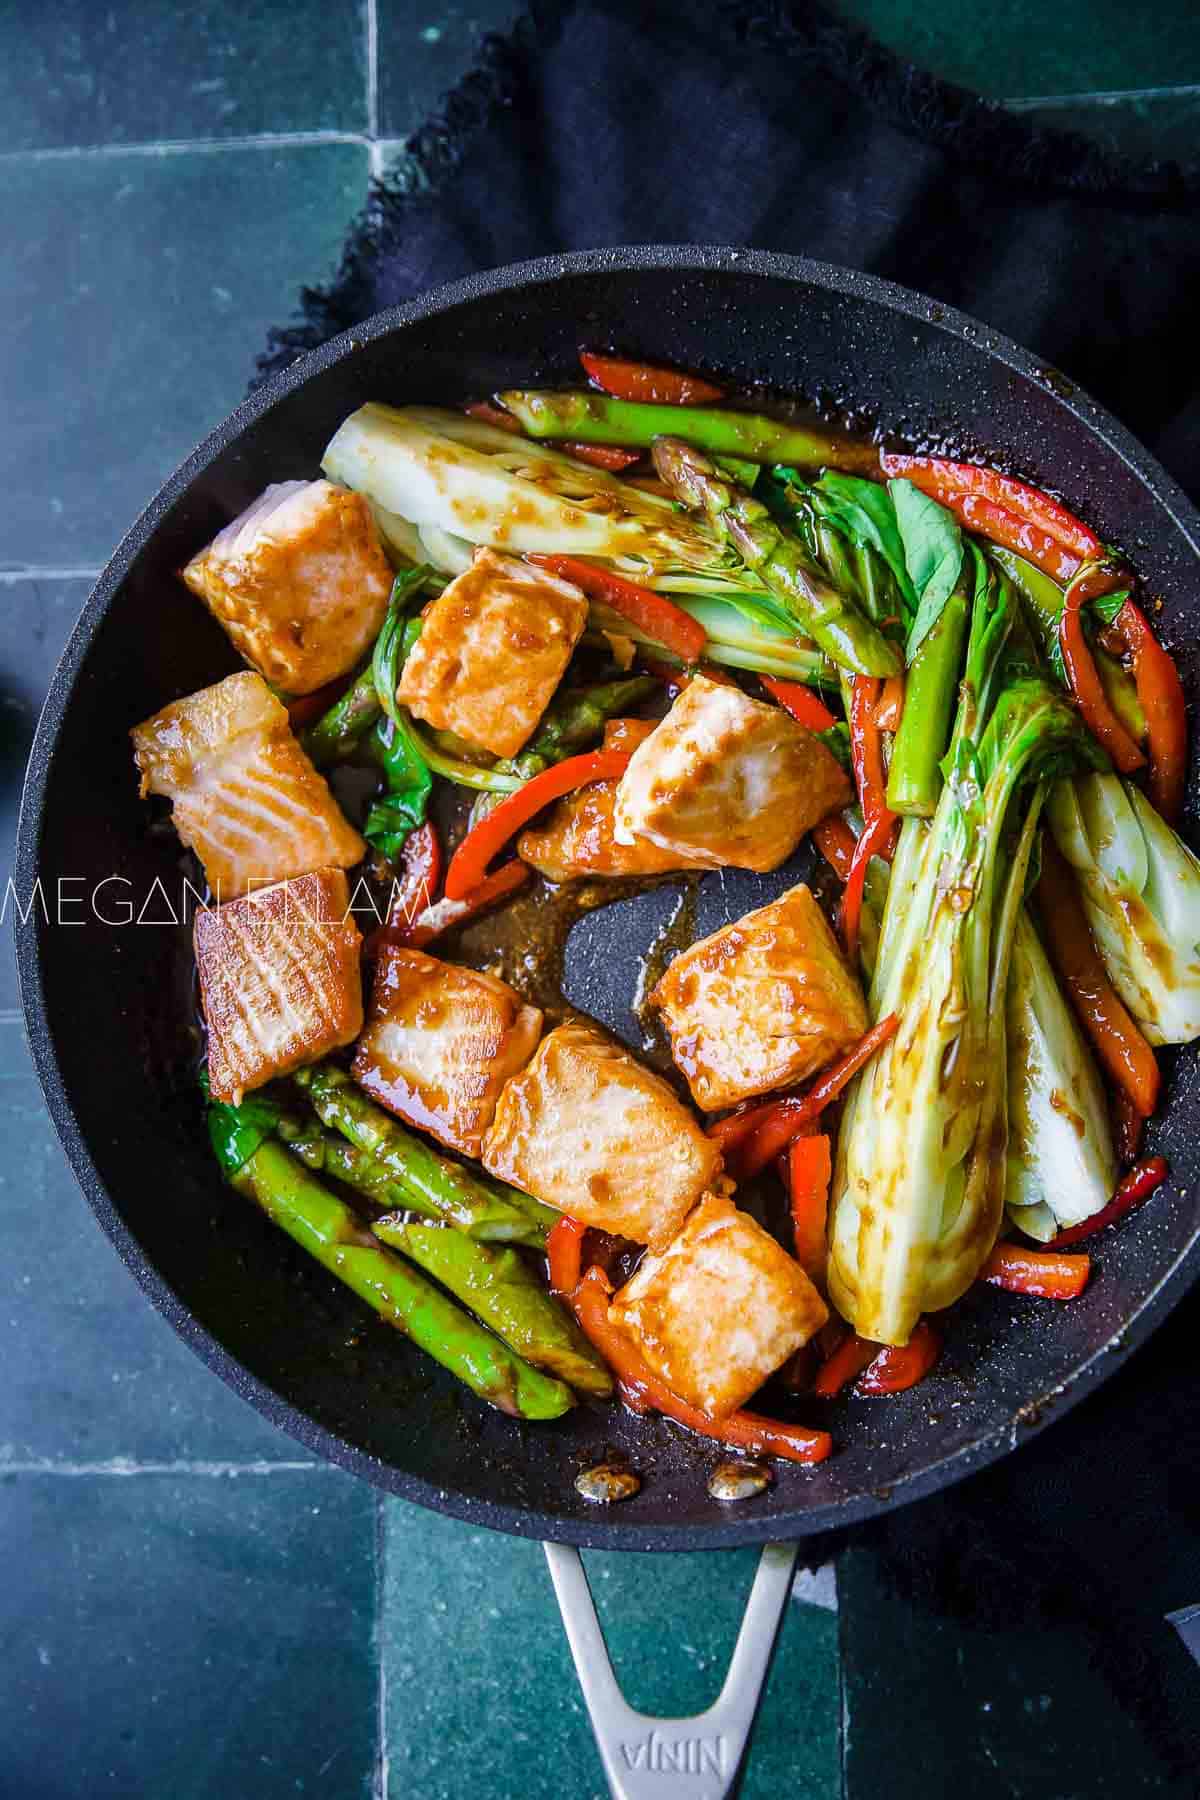 Salmon and vegetables in a frying pan.